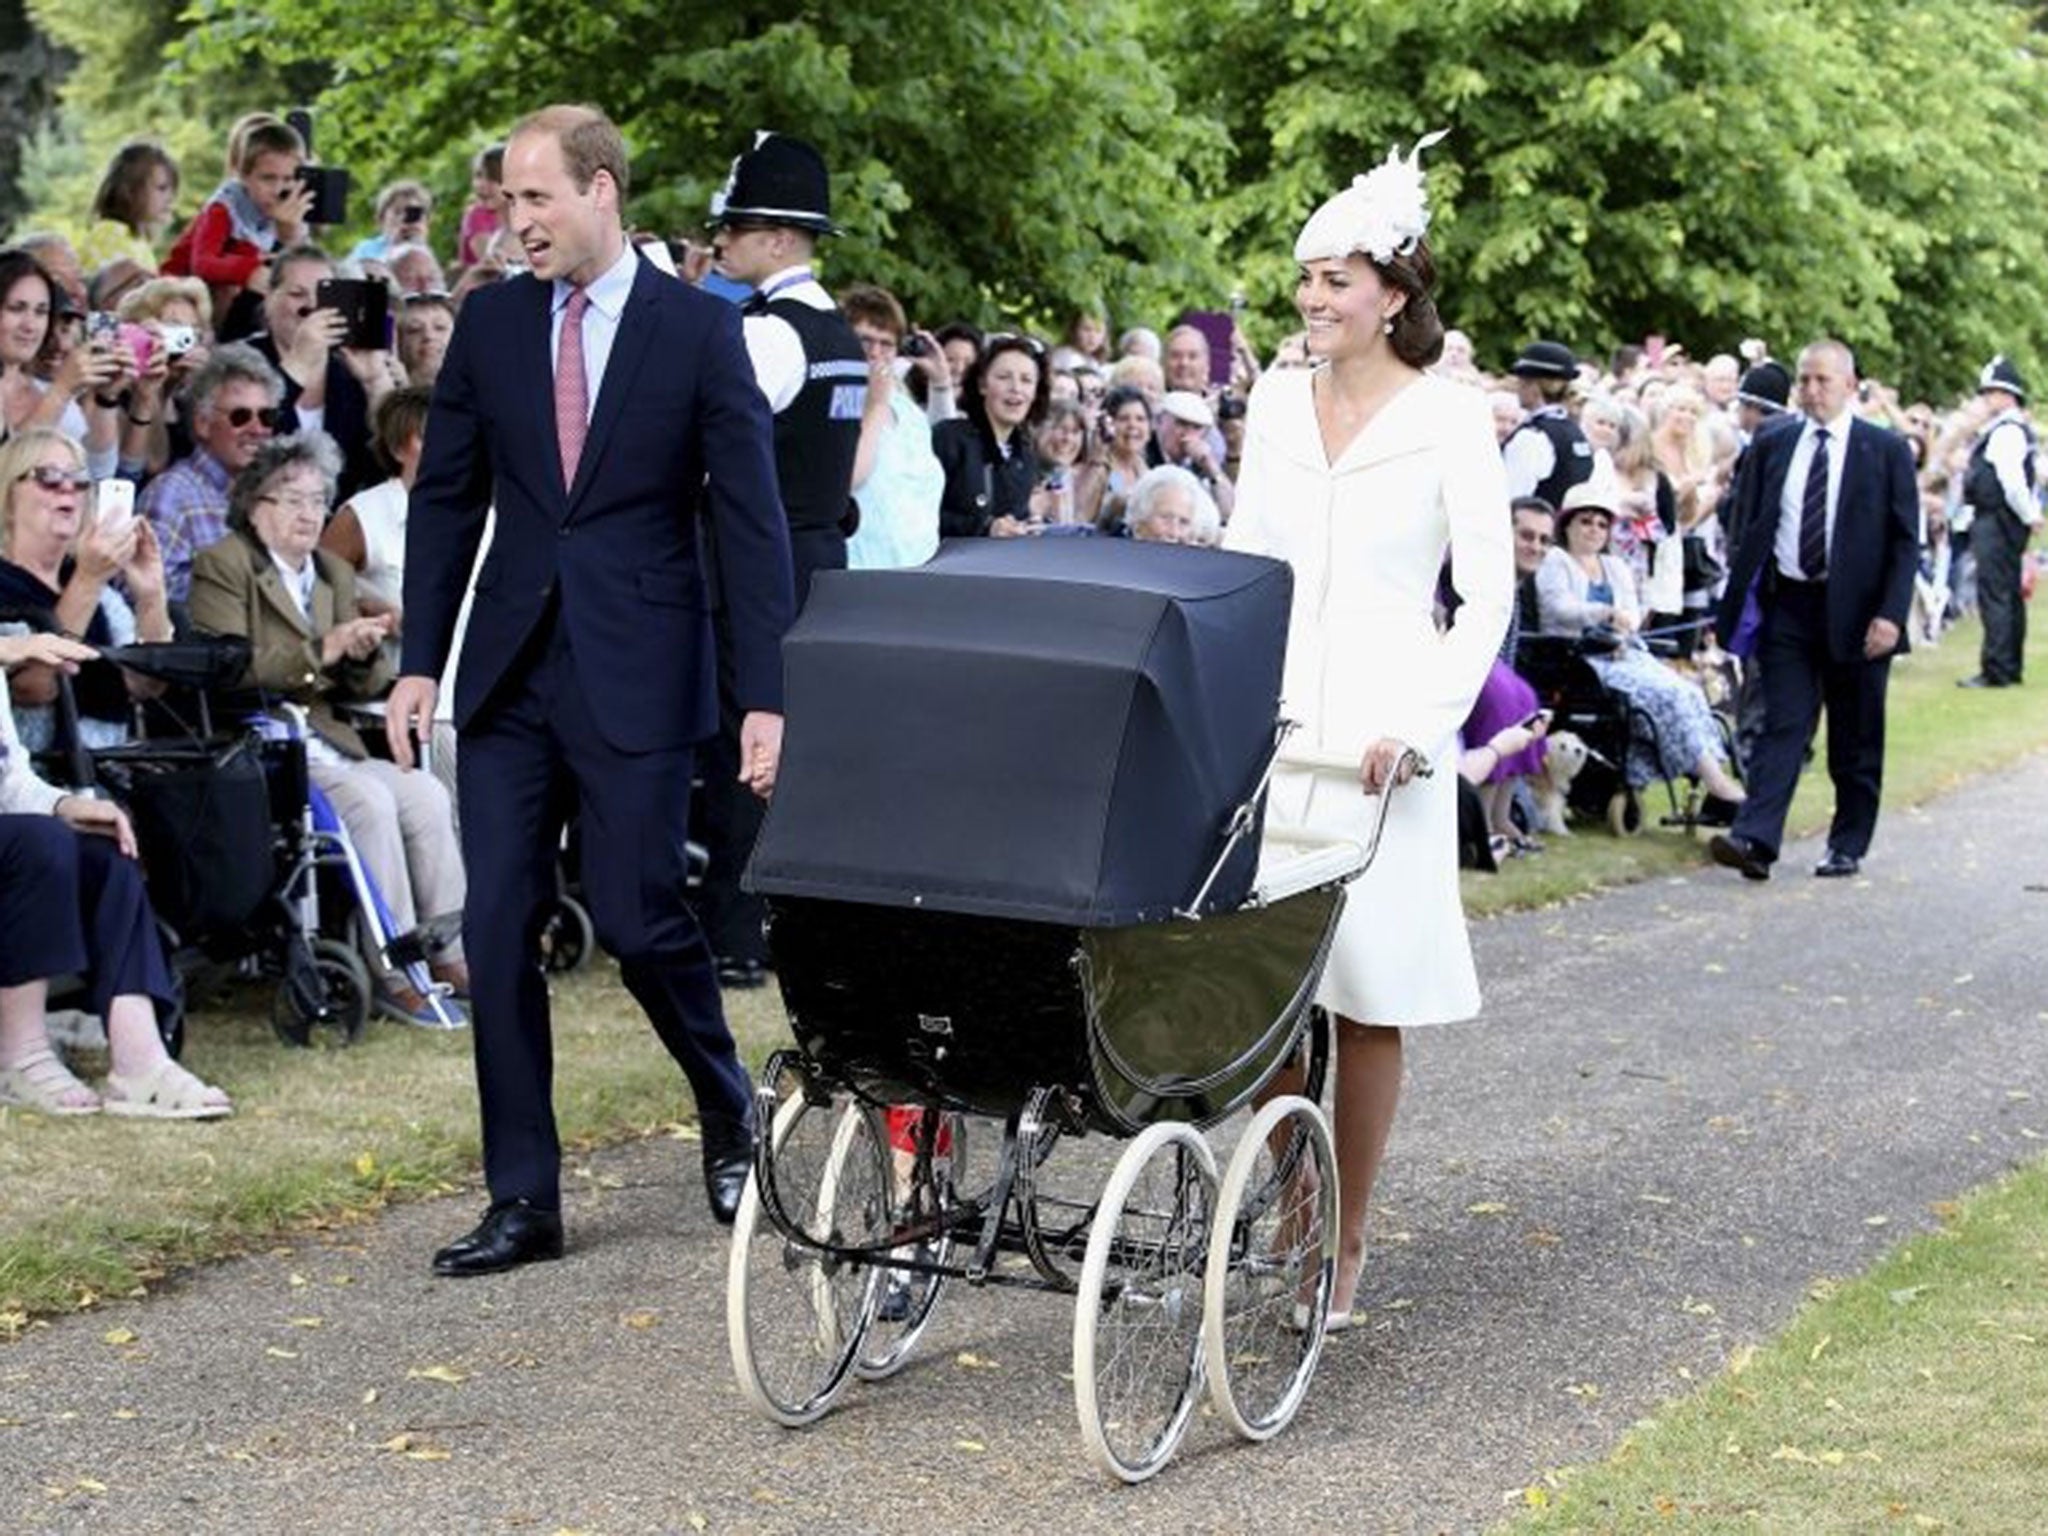 Britain's Prince William and his wife Catherine, Duchess of Cambridge walk past well wishers as they arrive with their son Prince George and daughter Princess Charlotte for her christening at the Church of St. Mary Magdalene in Sandringham, Britain July 5